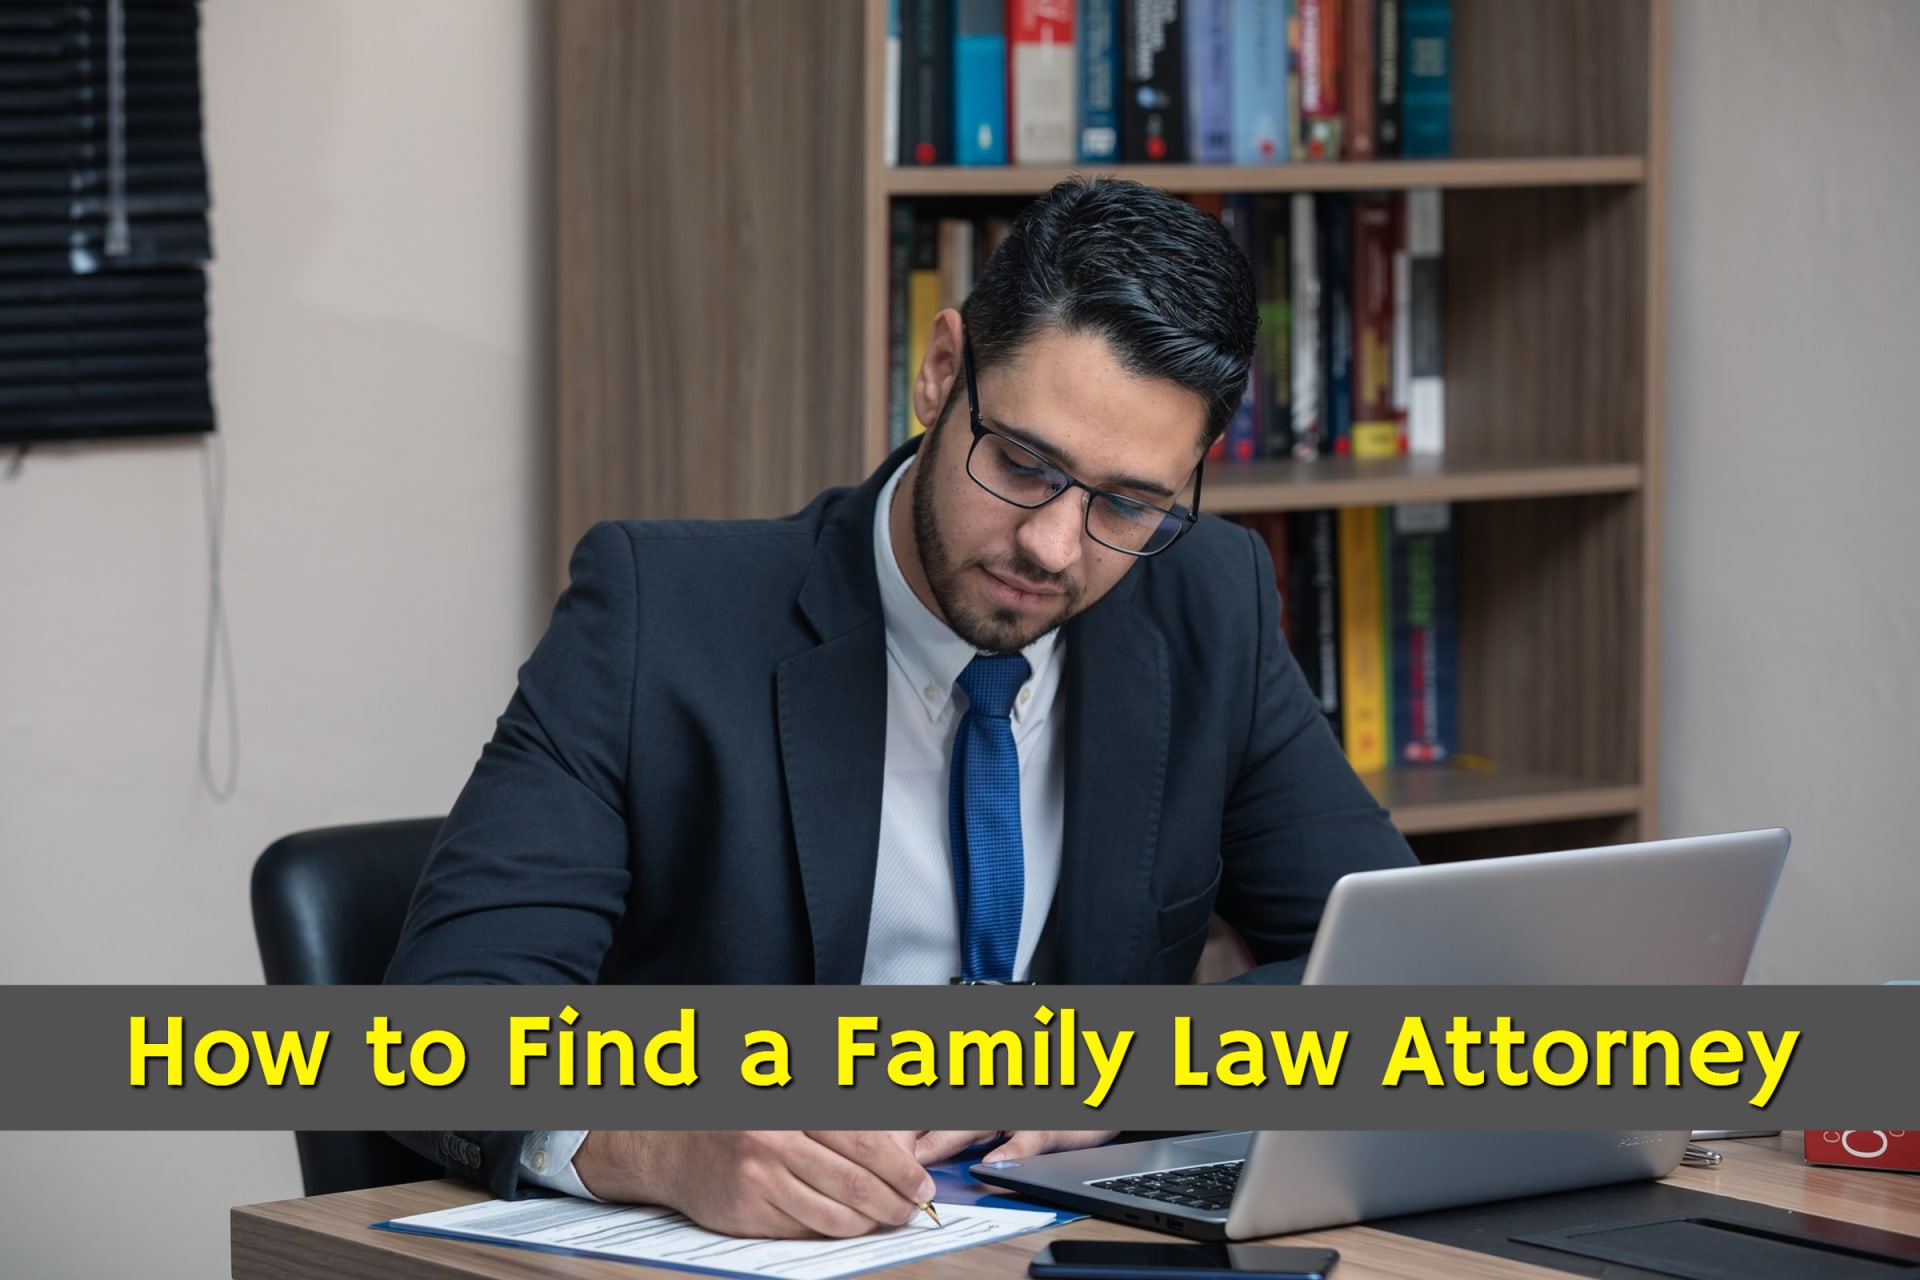 A man sitting at his computer with a notepad researching how to find a family law attorney